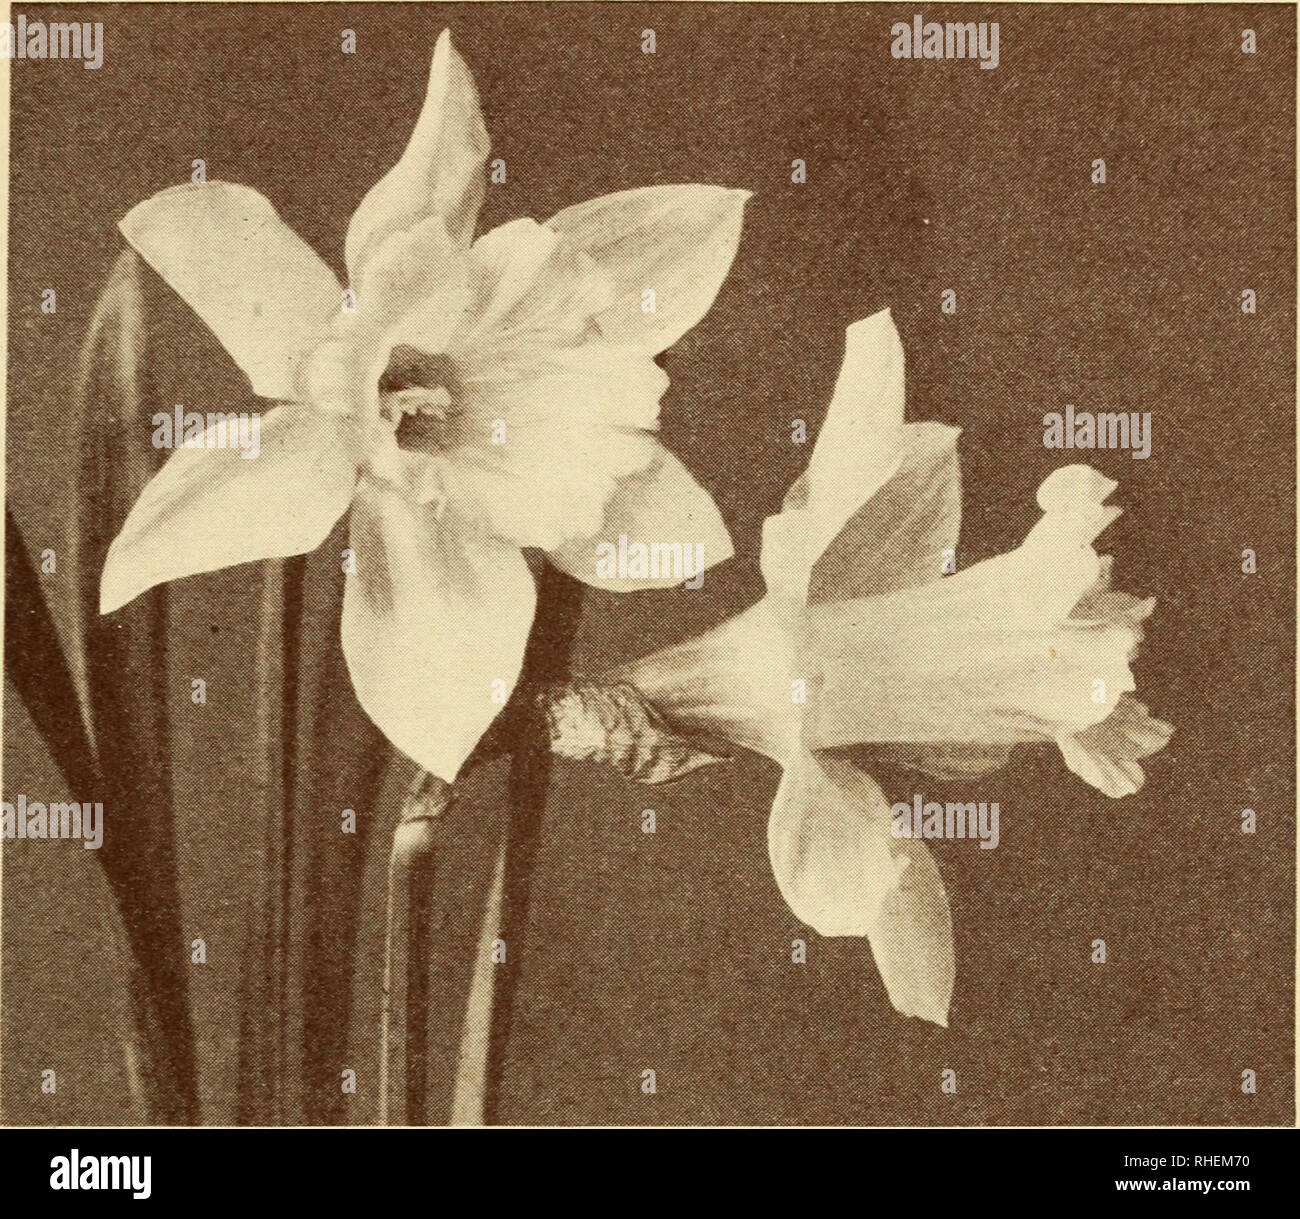 . Bolgiano's selected bulbs, plants, seeds, for fall planting, 1927. F. W. BOLGIANO &amp; CO., WASHINGTON, D. C. Narcissus or Daffodils. Single Large Trumpet Varieties (Daffodils) There is no hardy bulbous plant which has more points of merit than the Narcissus. Perfectly hardy, growing and doing well in almost any and every ix)sition, sun or shade, moist or dry. They are equally suited to pot culture for Winter flowering. Each. Doz. 100. BICOLOR VICTORIA. Petals creamy white, trumpet rich yellow, unsurpassed for forcing. Extra Double Nose Bulbs $0.15 $1.50 $11.50 EMPEROR. This grand variety i Stock Photo